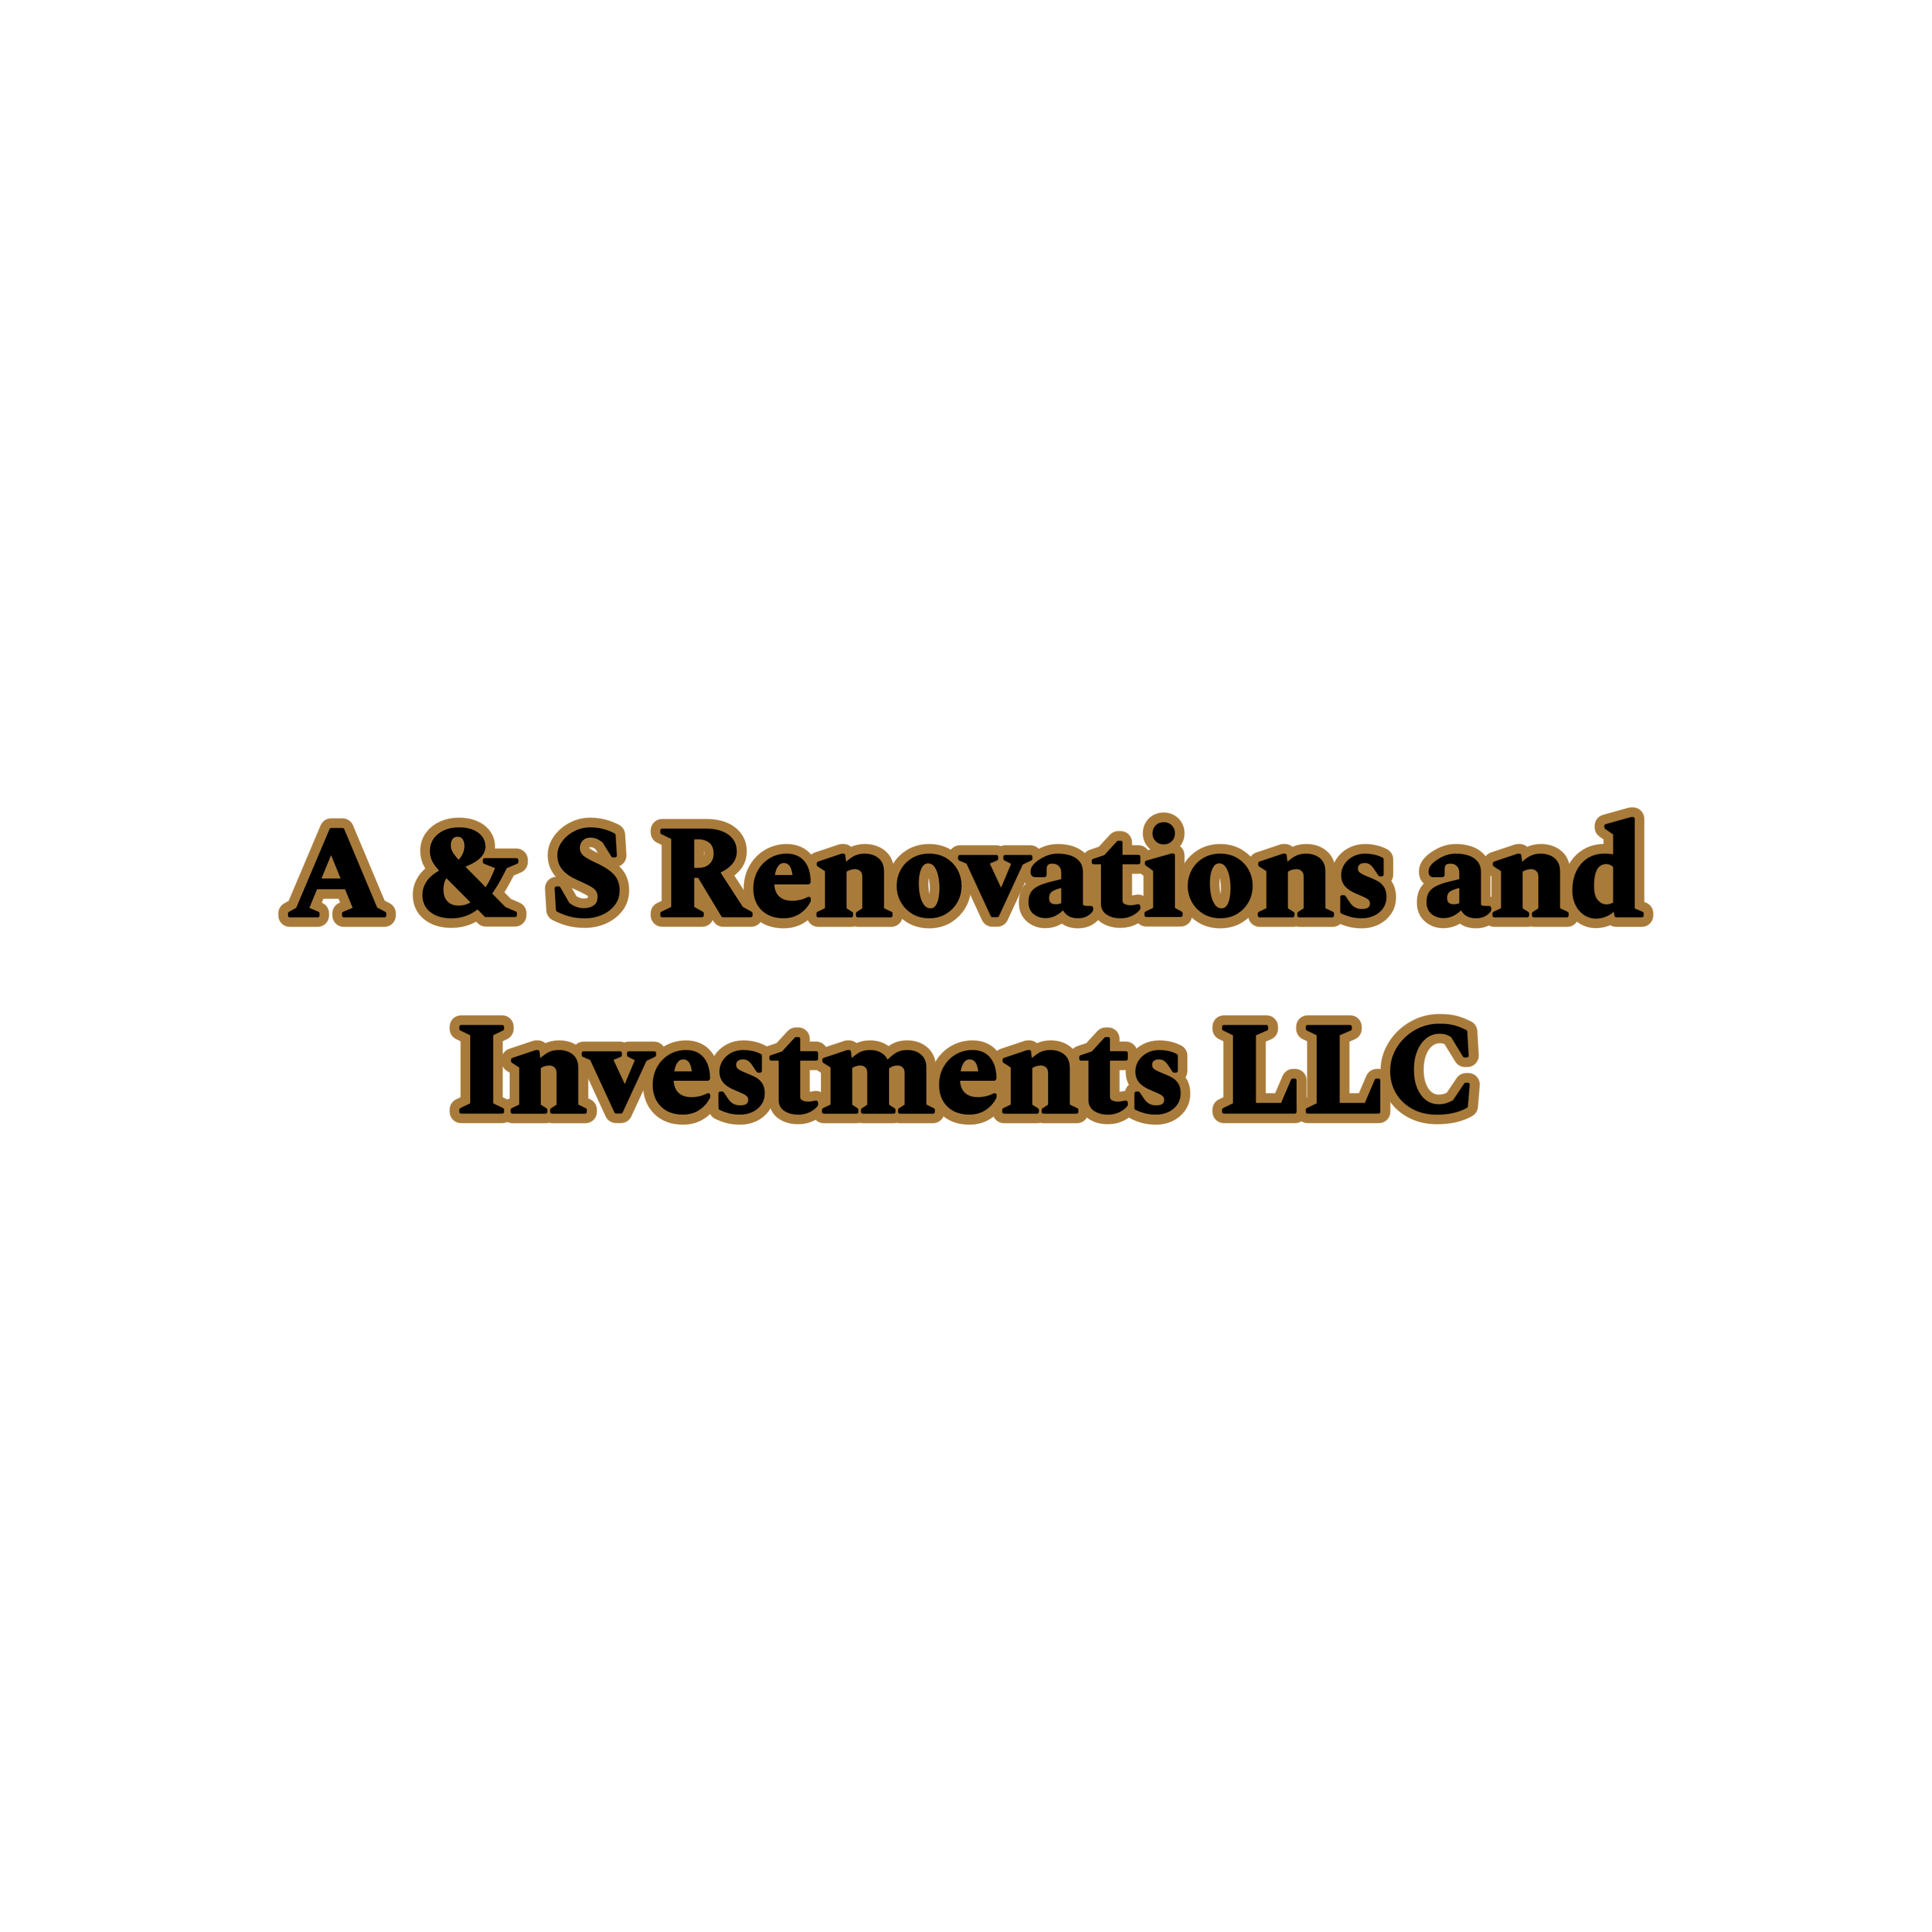 A & S Renovations and Investments LLC